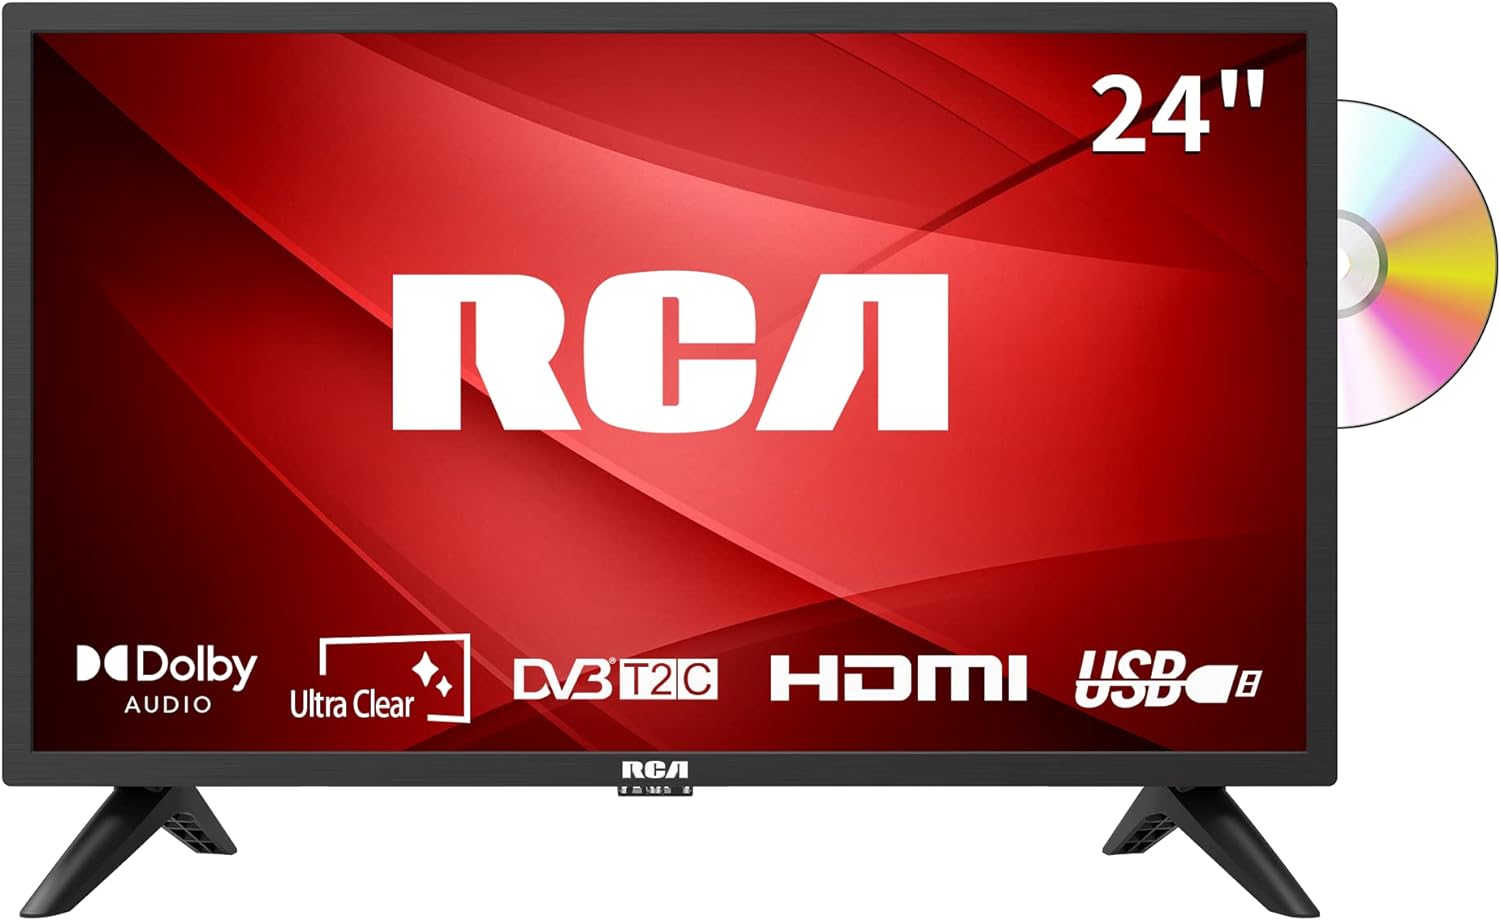 RCA RB22HT5 22 Inch FHD TV, Freeview HD DVB - T2 - C - S2 Dolby Digital Audio Kitchen TV, FHD LED Backlighting Display, HDMI VGA PC Audio SCART USB Record Media Player, Small TV for Small Lounge Kitchen - Amazing Gadgets Outlet